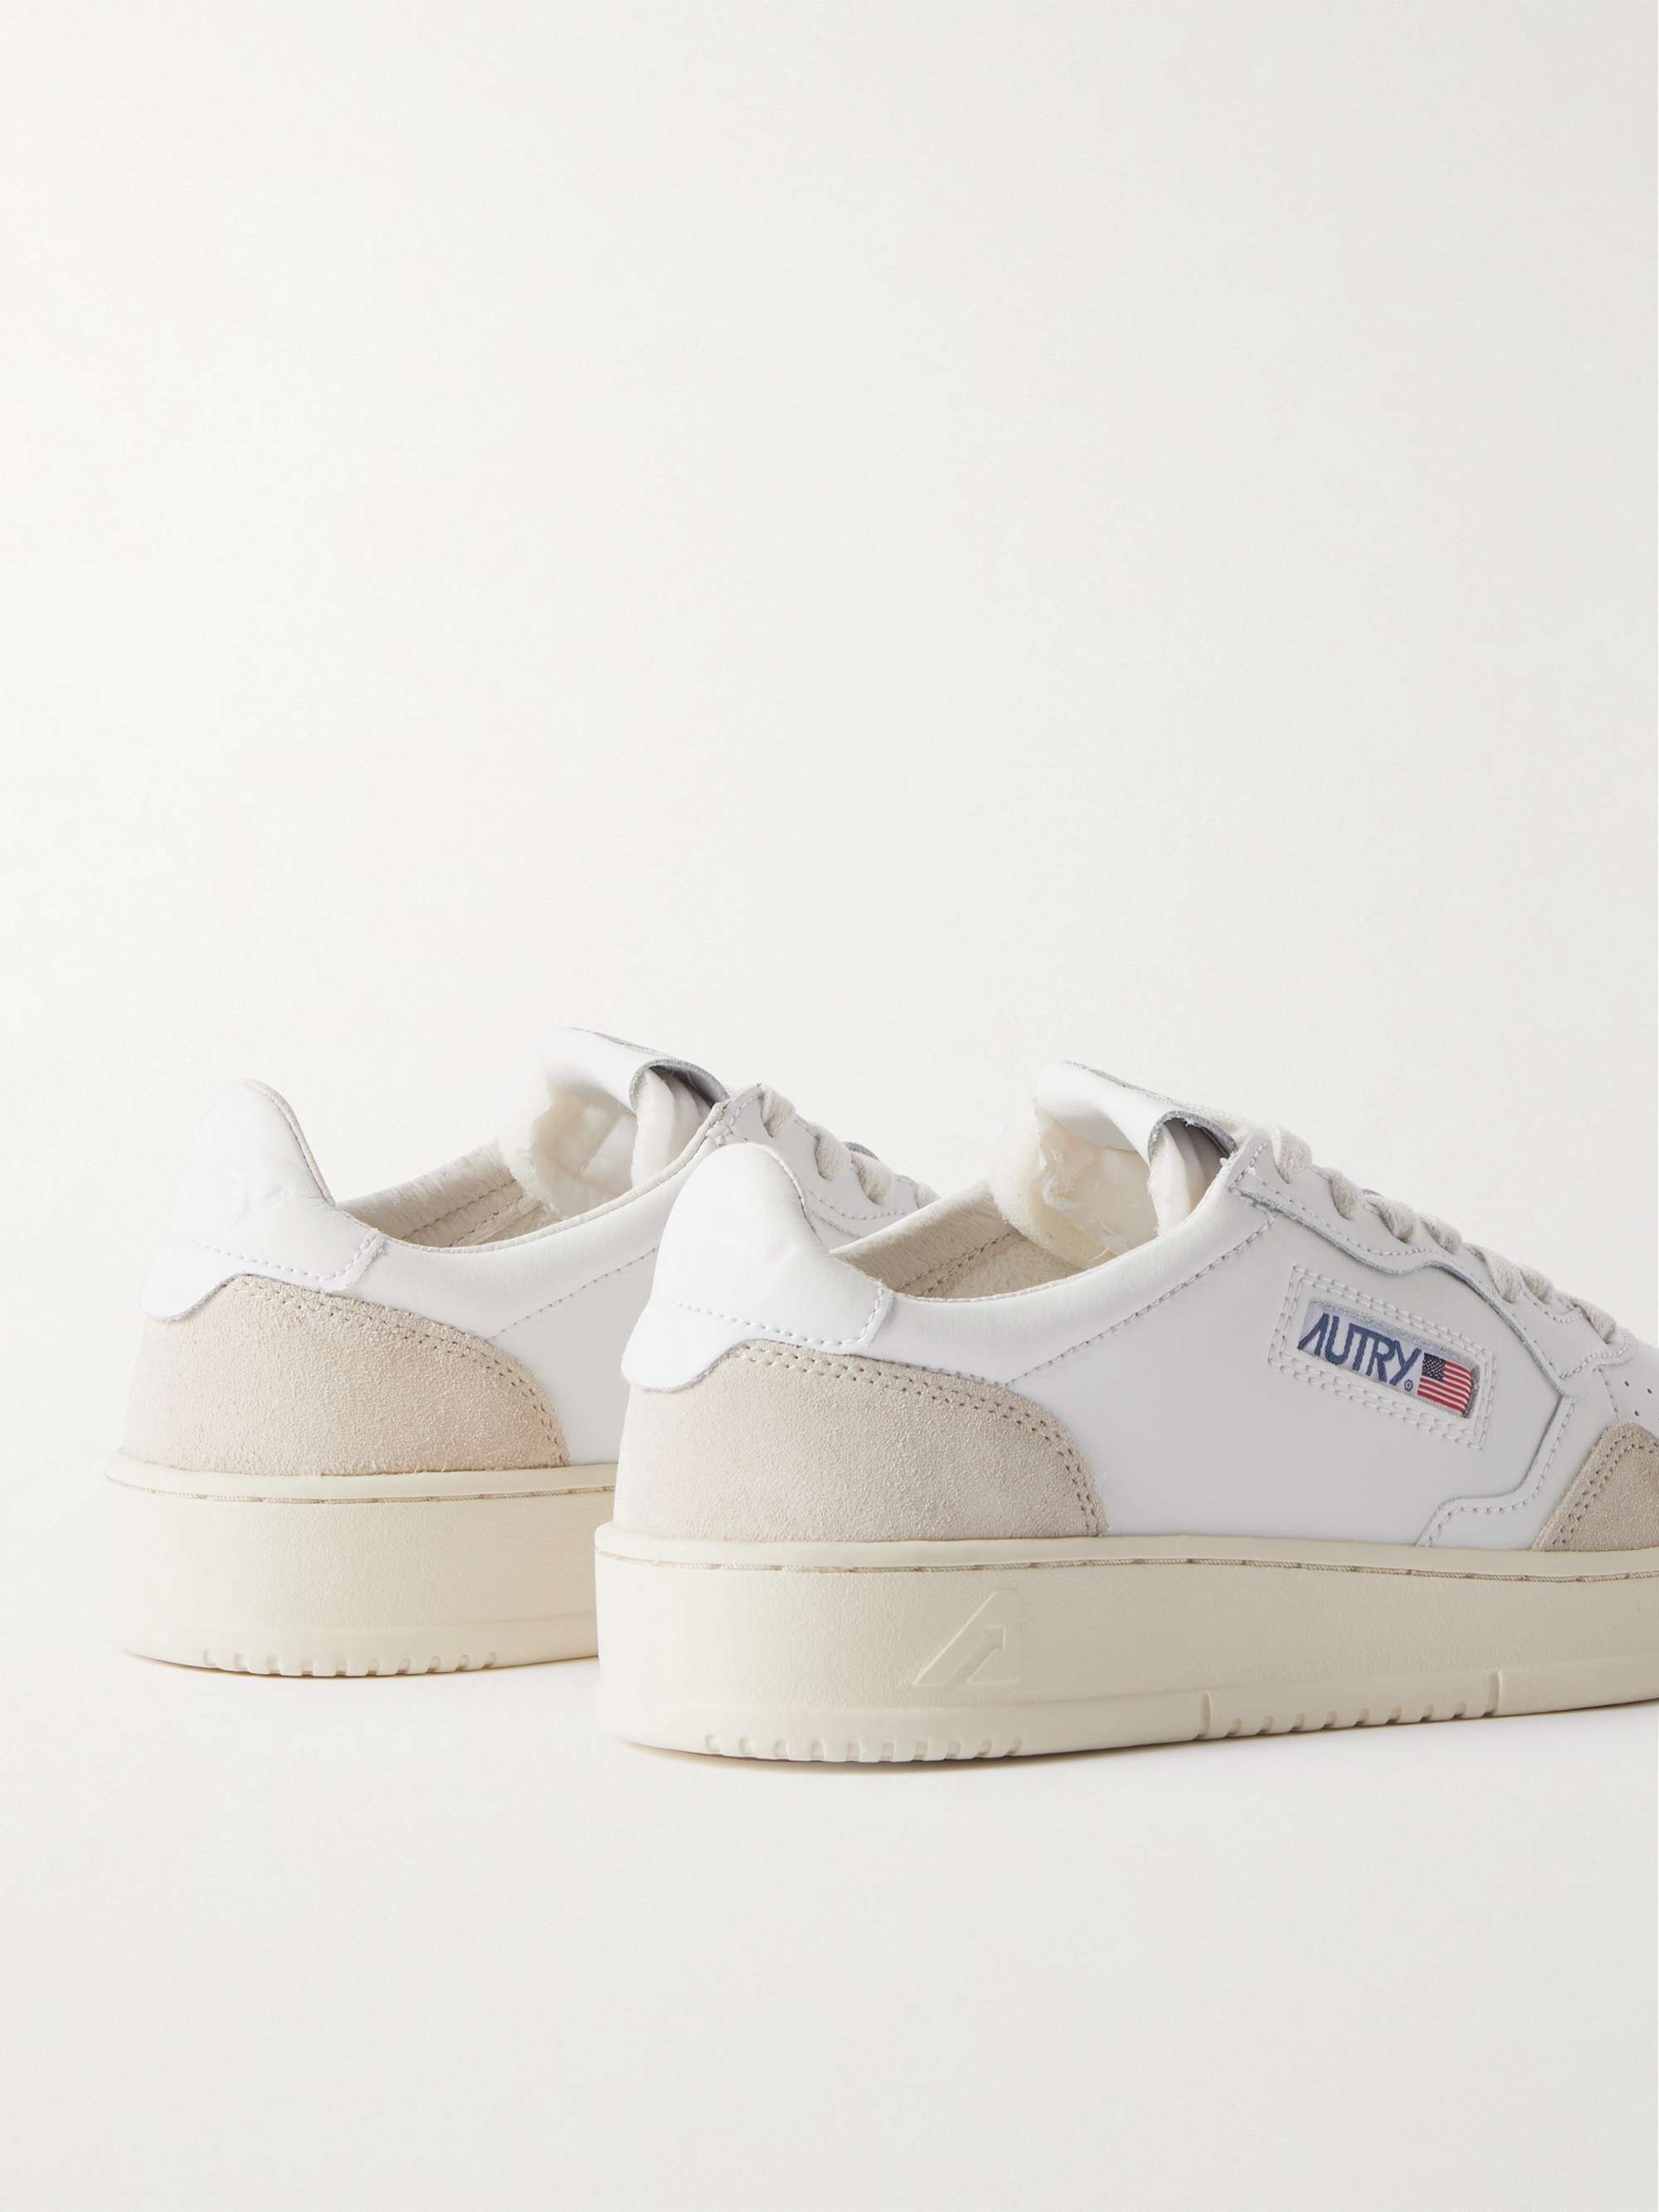 AUTRY Suede-Trimmed Perforated Leather Sneakers